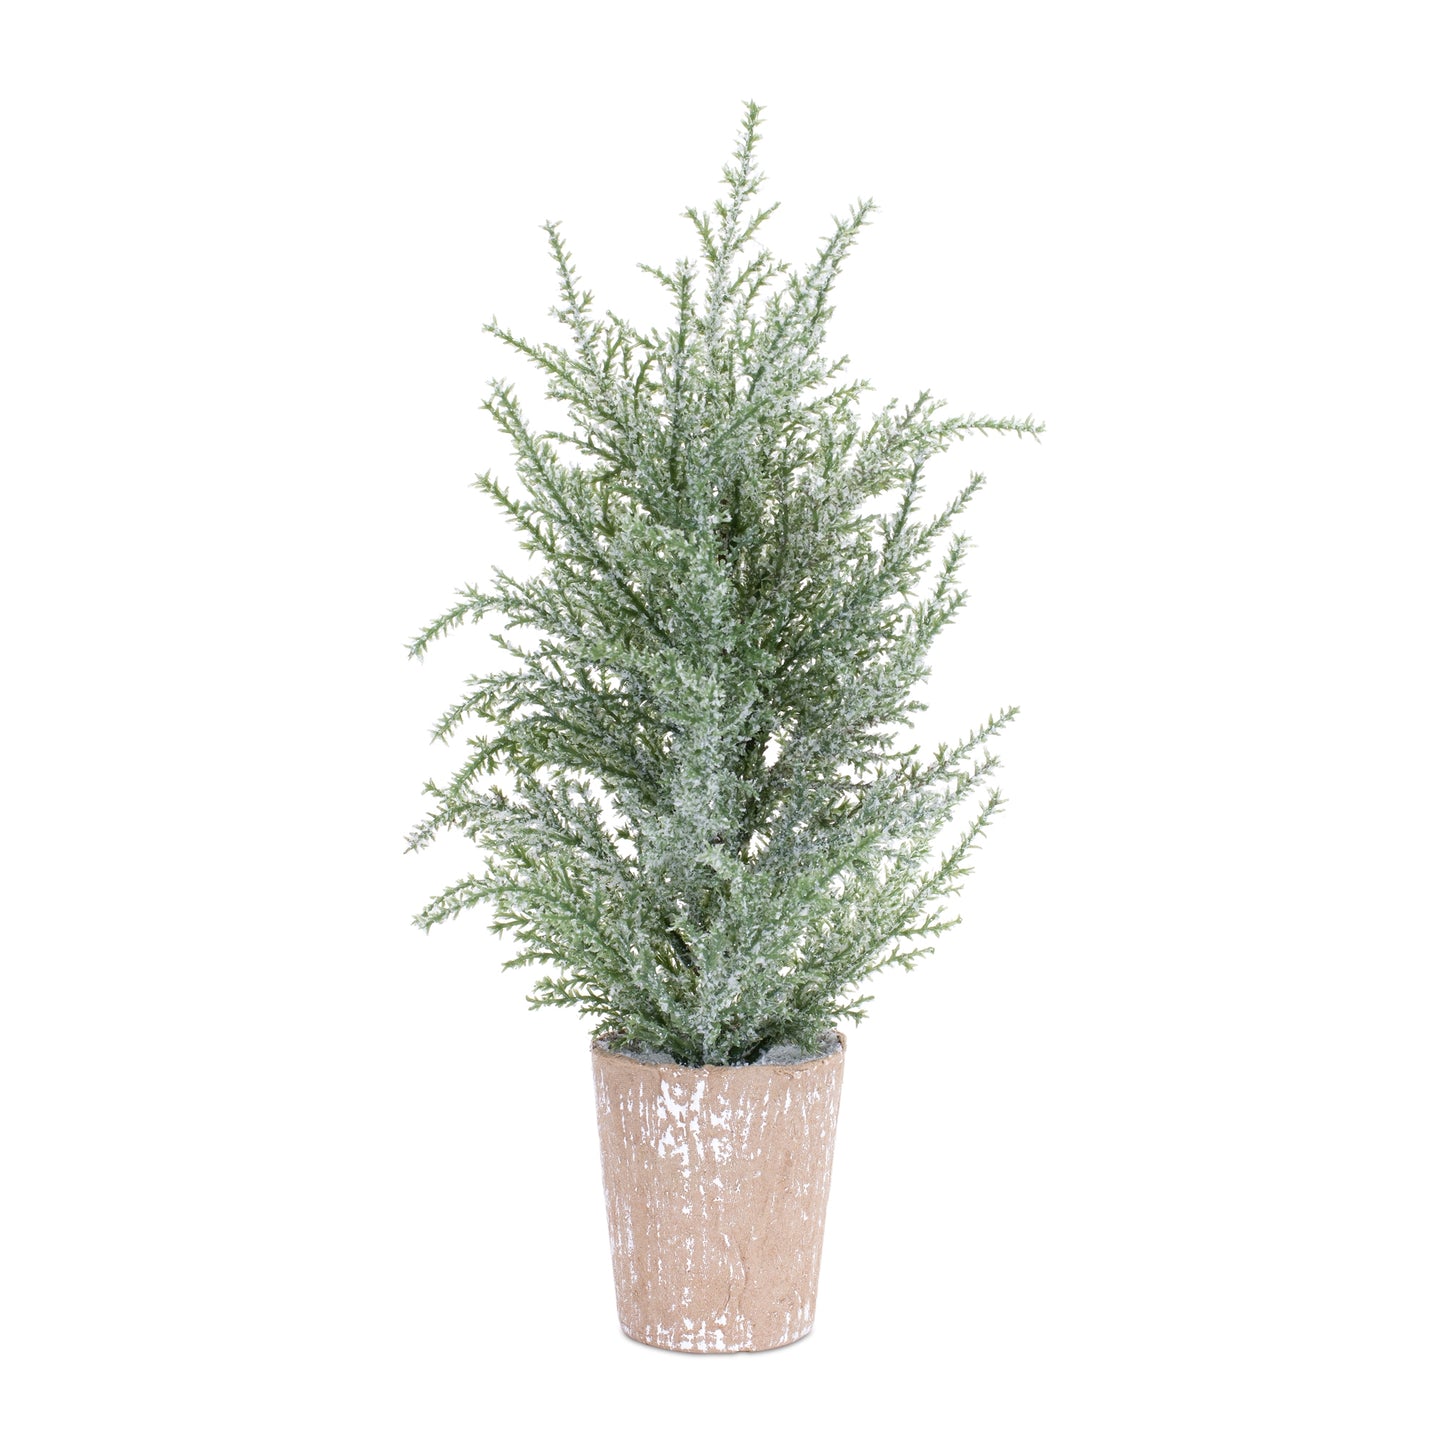 Potted Icy Pine Tree